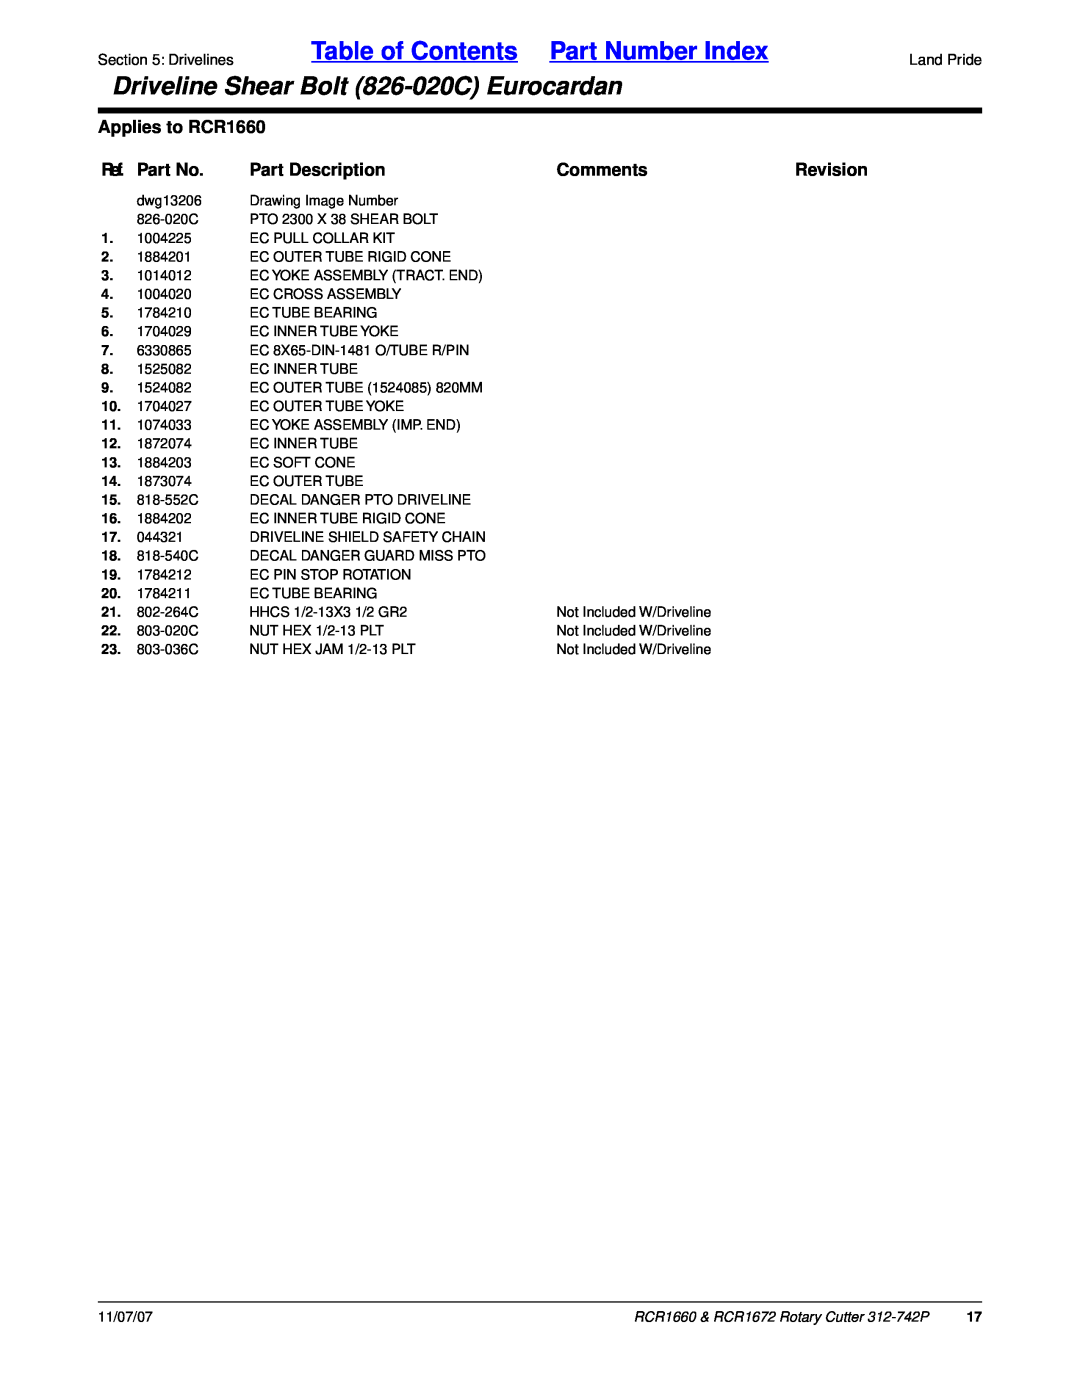 Land Pride Table of Contents Part Number Index, Driveline Shear Bolt 826-020CEurocardan, Applies to RCR1660, Comments 